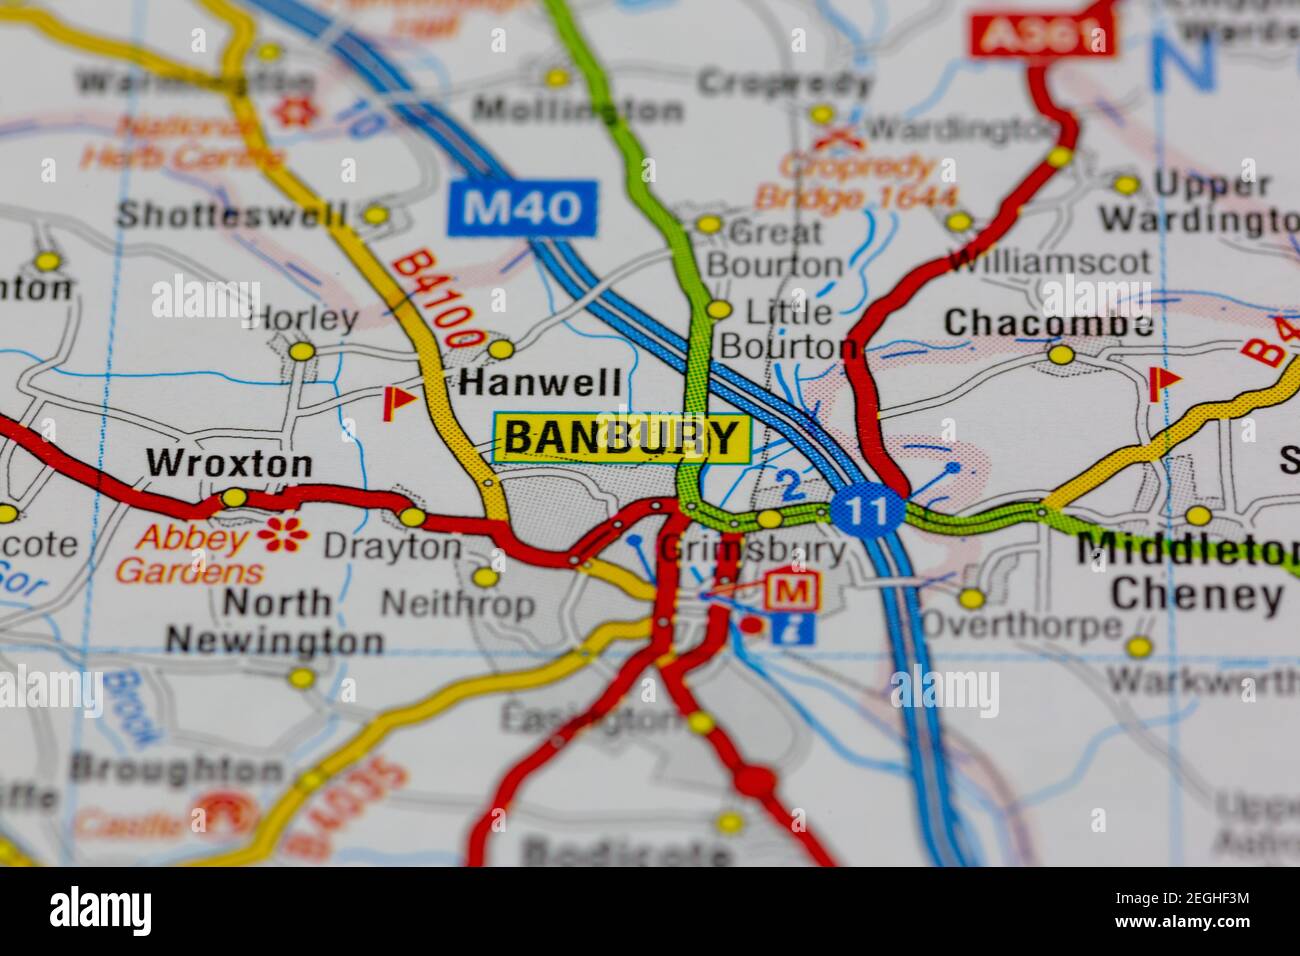 Banbury and surrounding areas shown on a road map or geography map Stock Photo